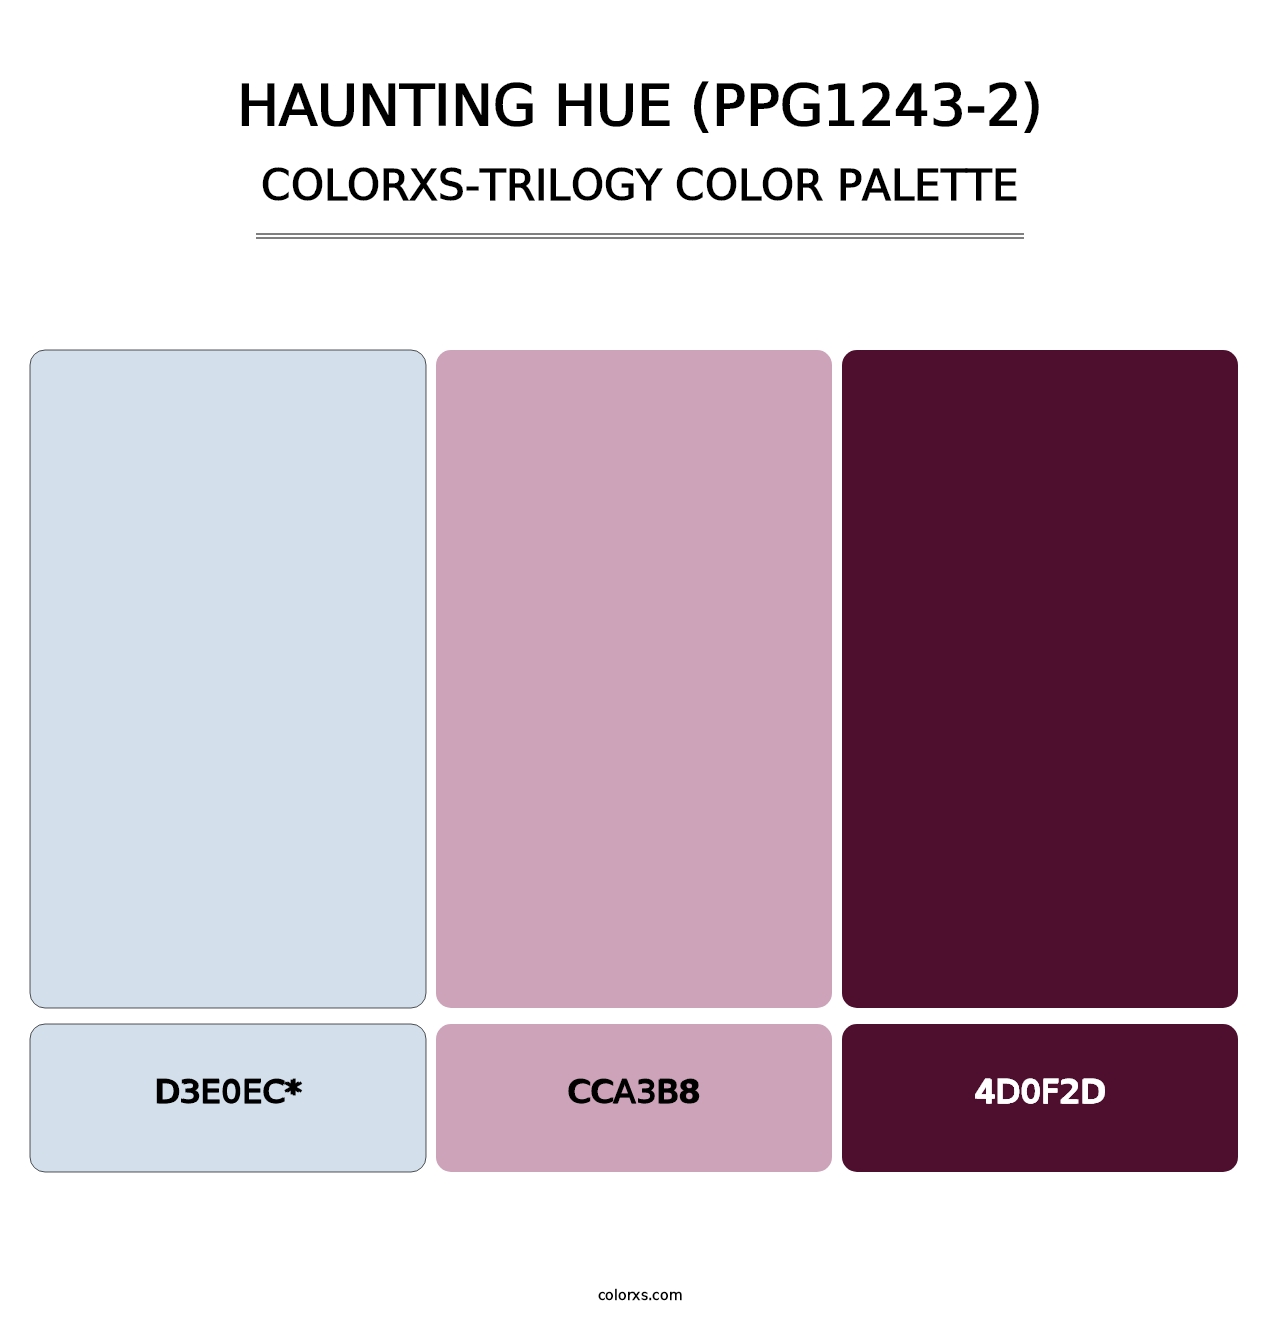 Haunting Hue (PPG1243-2) - Colorxs Trilogy Palette